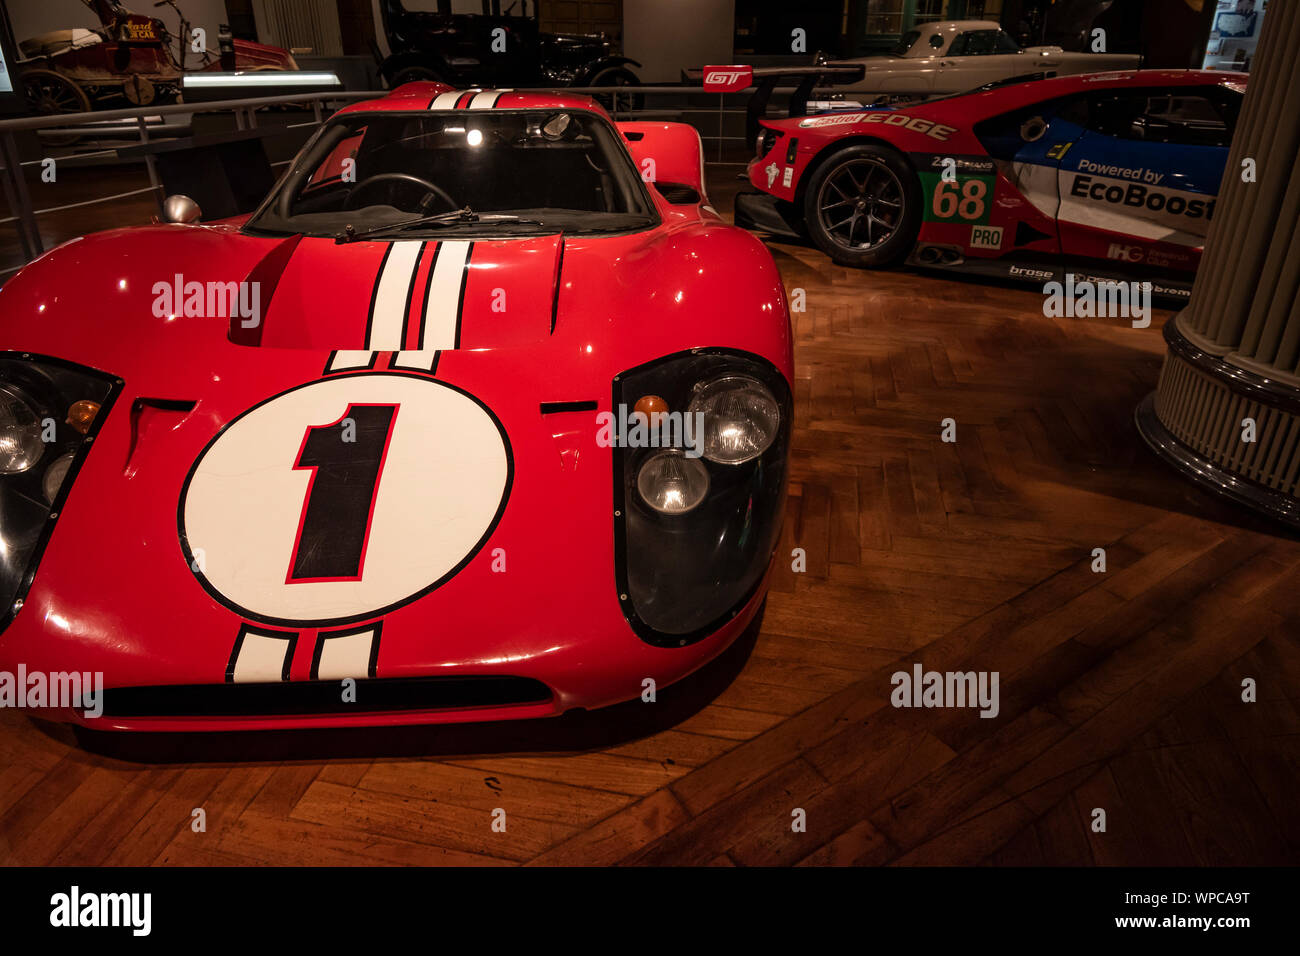 Dearborn, Mi, Usa - March 2019: Ford Mark IV sport and racing car presented in the Henry Ford Museum of American Innovation. Stock Photo